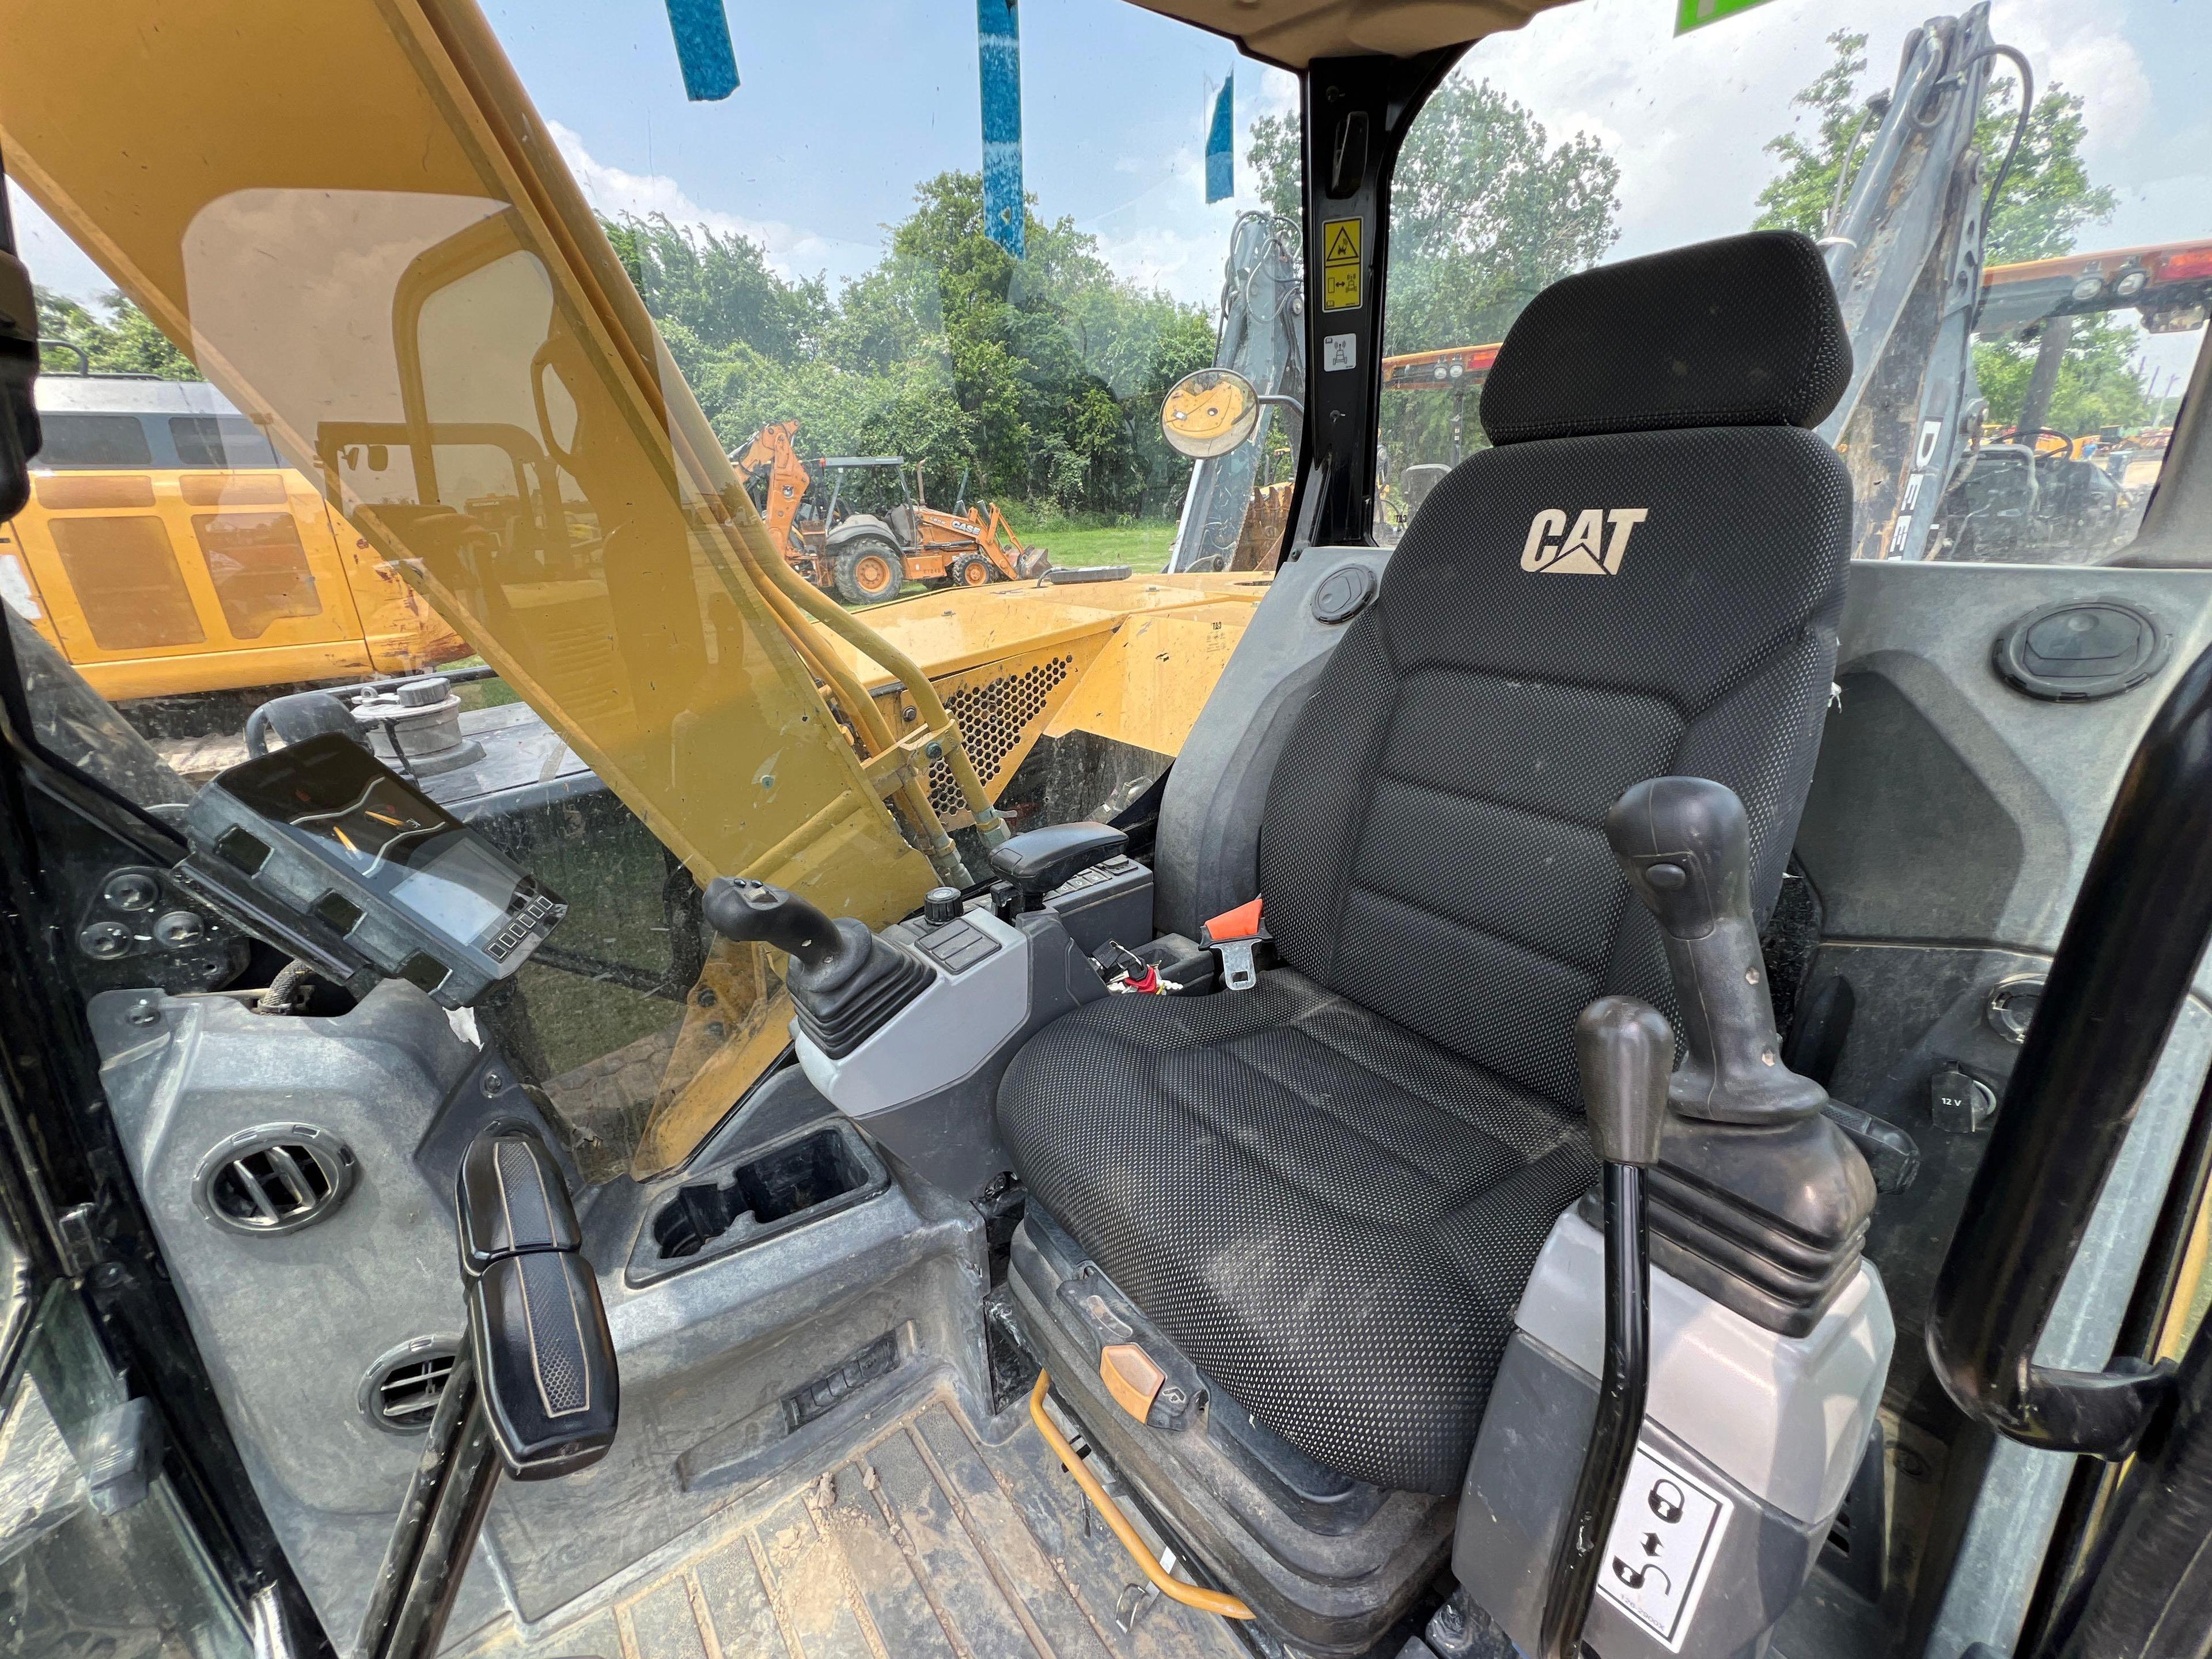 2019 CAT 307.5 HYDRAULIC EXCAVATOR SN:GW701306 powered by Cat diesel engine, equipped with Cab, air,